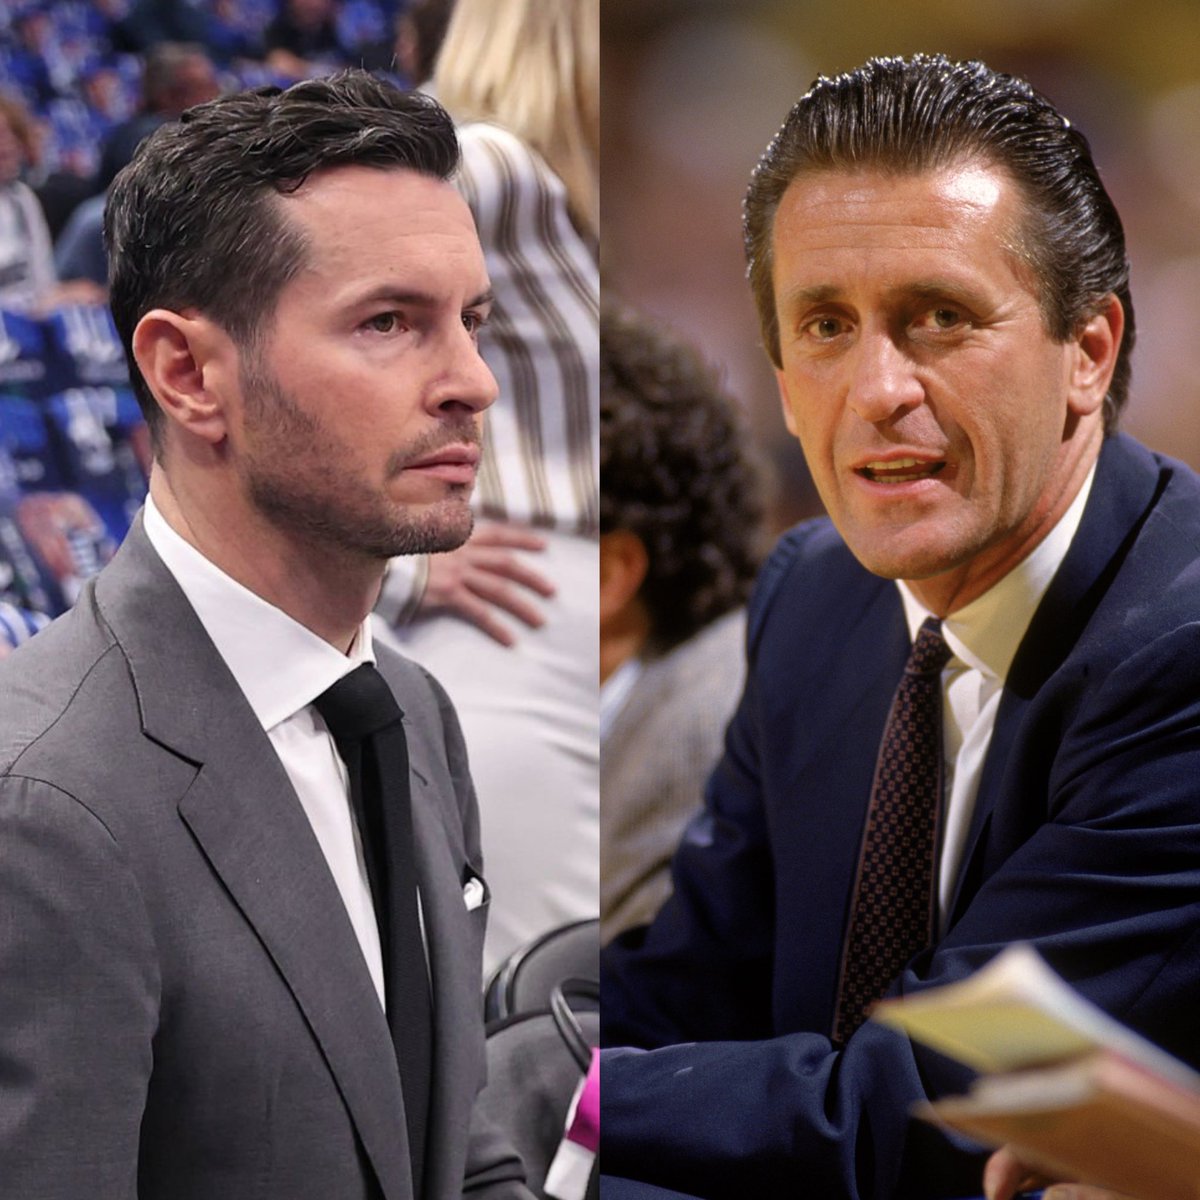 The Lakers reportedly think JJ Redick has ‘Pat Riley-like’ potential, per @jovanbuha & @ShamsCharania “Leaguewide, Redick — a former player and media analyst — has garnered buzz for the position. The Lakers are infatuated with Redick’s potential, according to league sources,